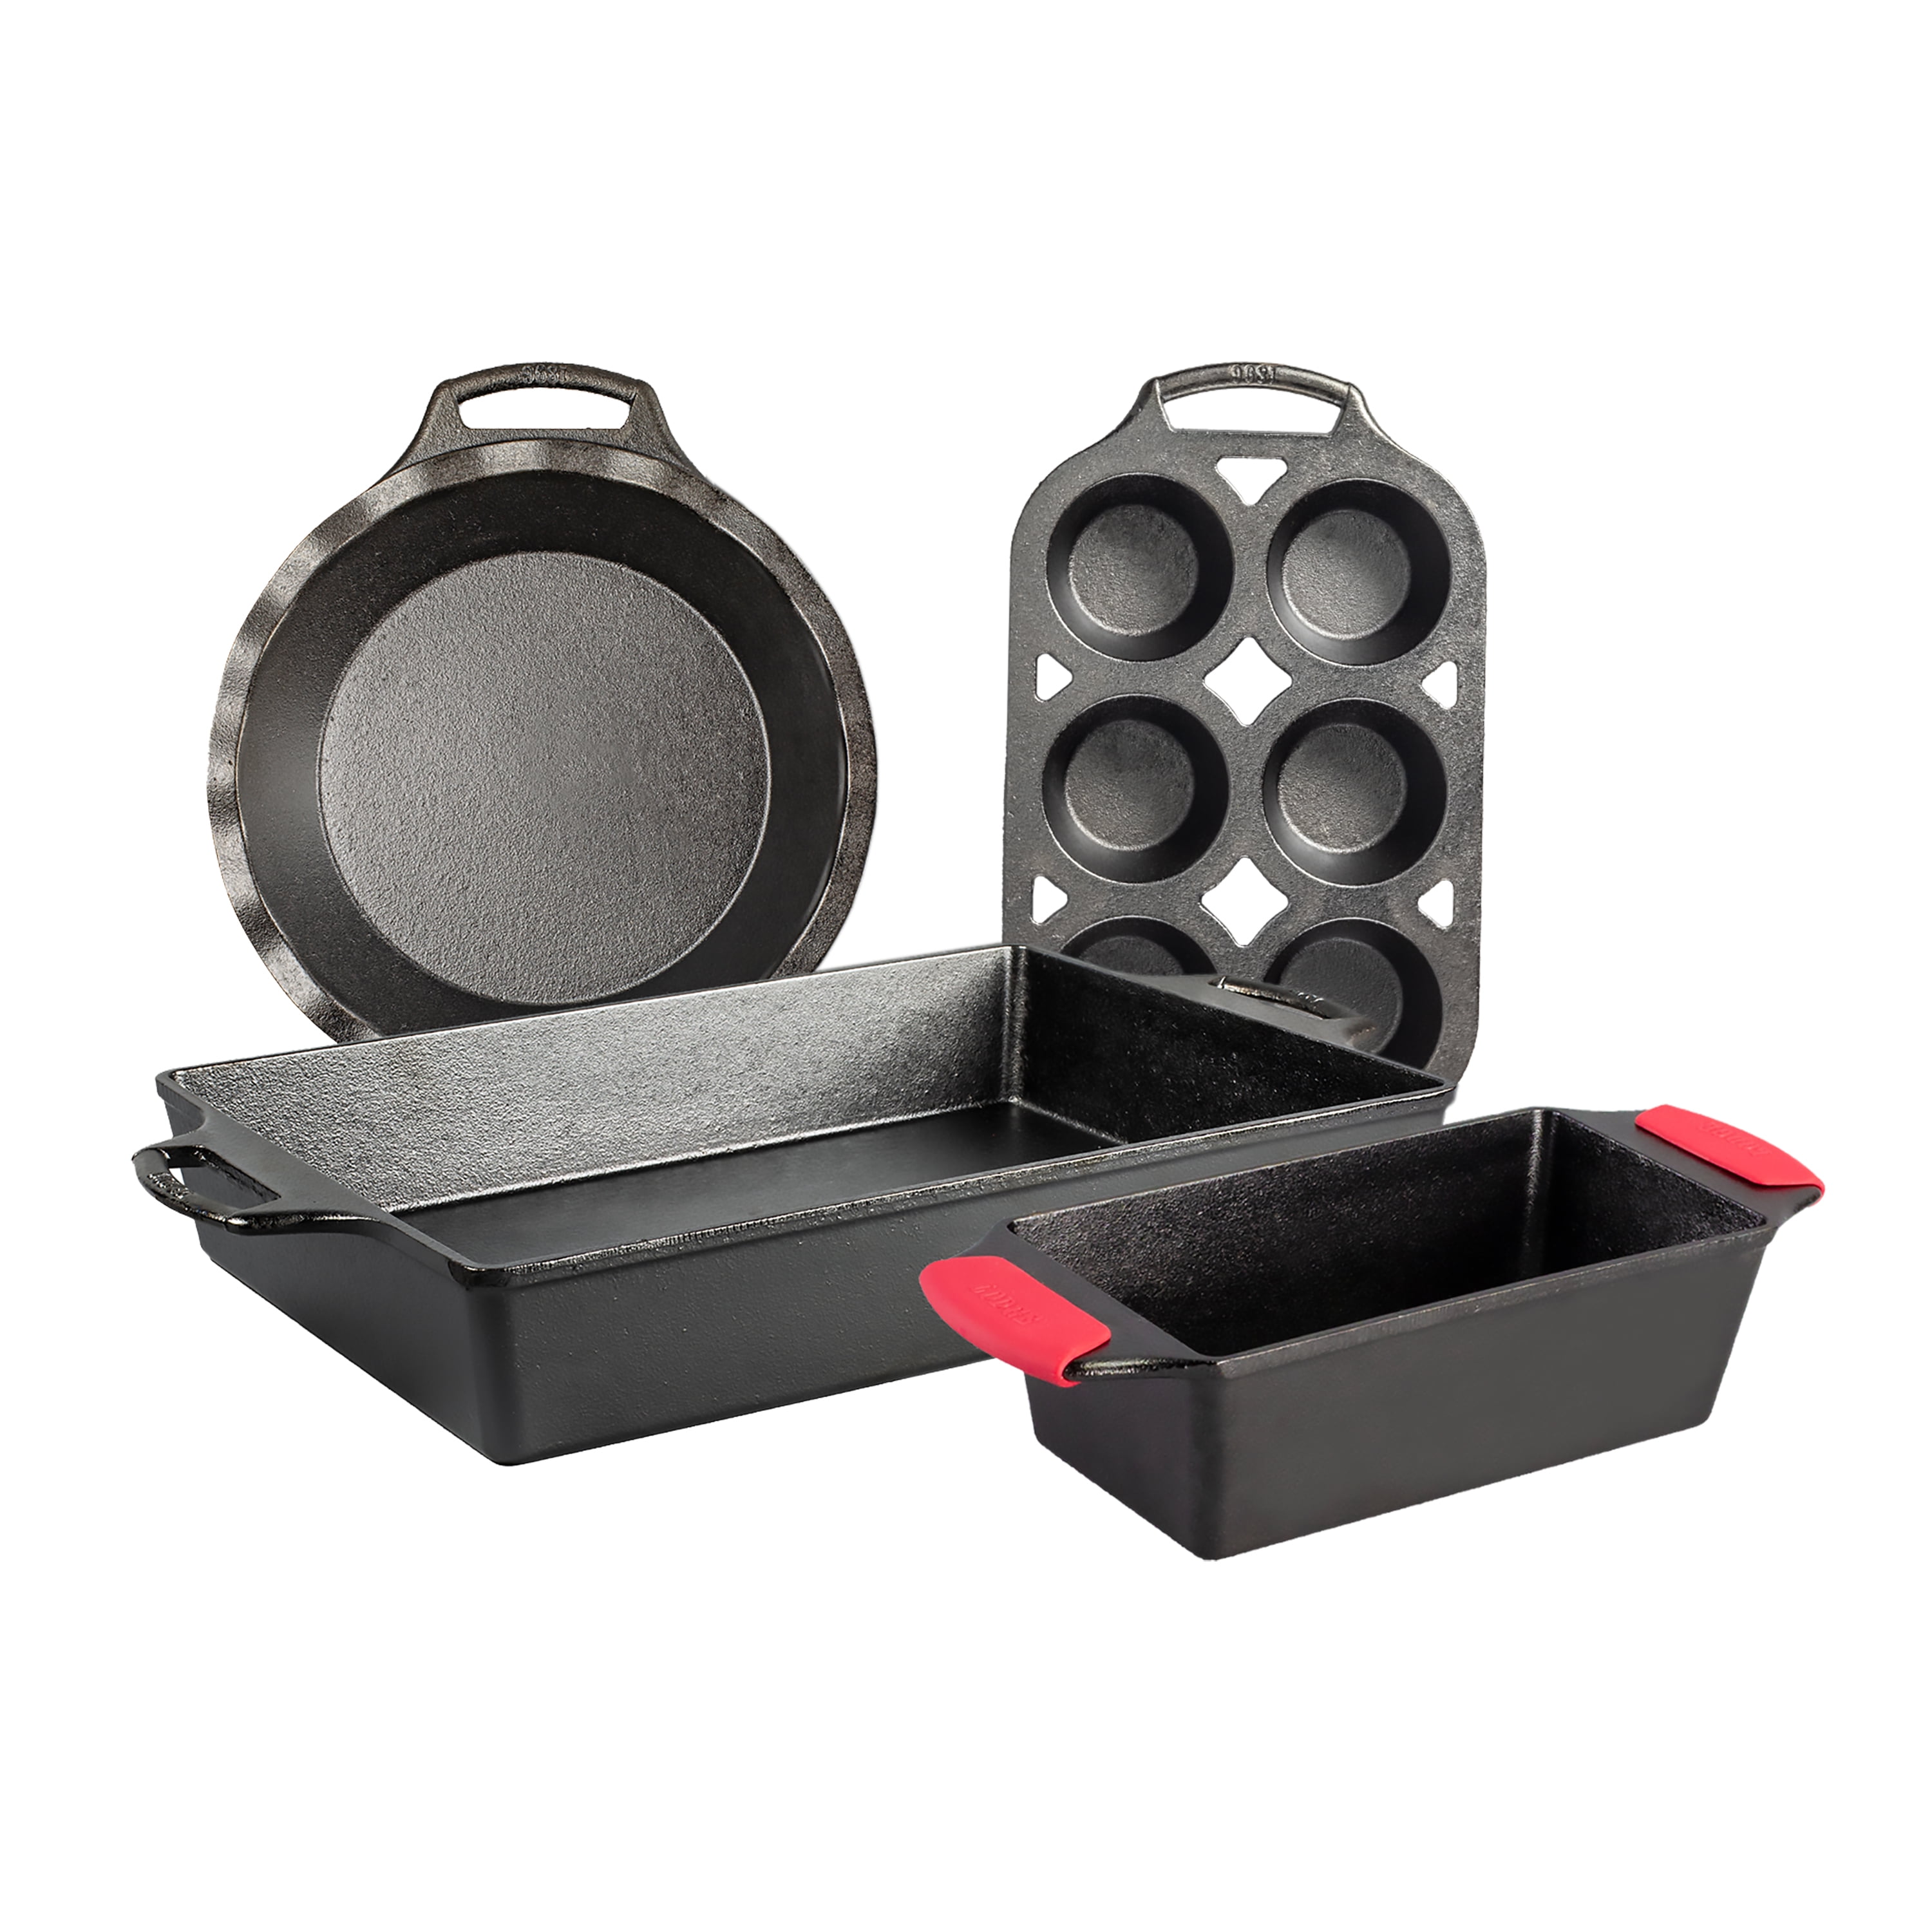 Lodge Cast Iron 9 Pie Pan with Silicone Grip